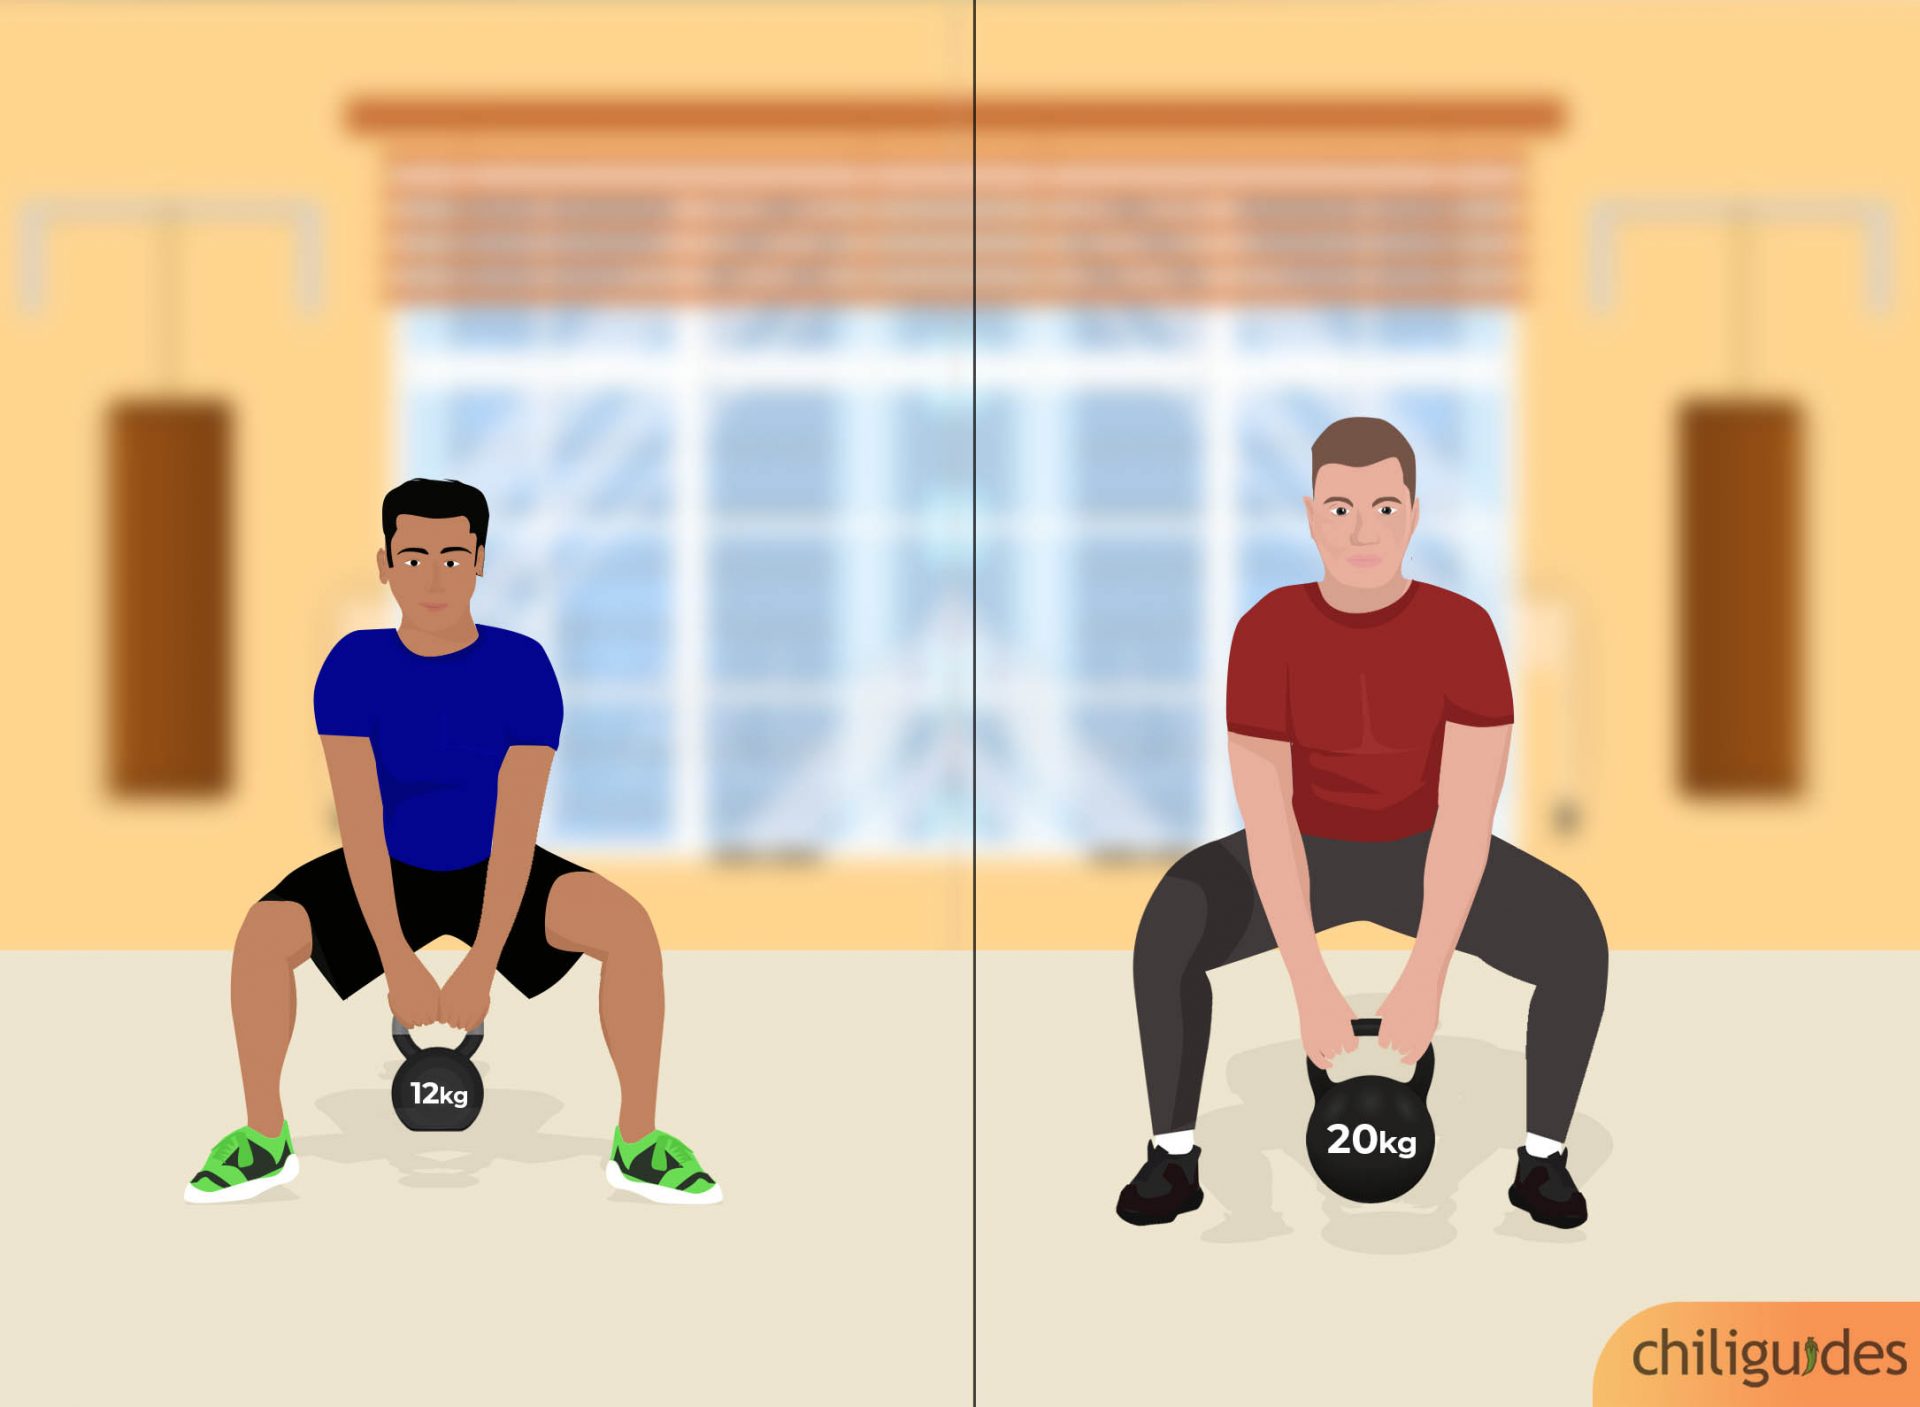 Your experience with kettlebells will determine the weight you need.